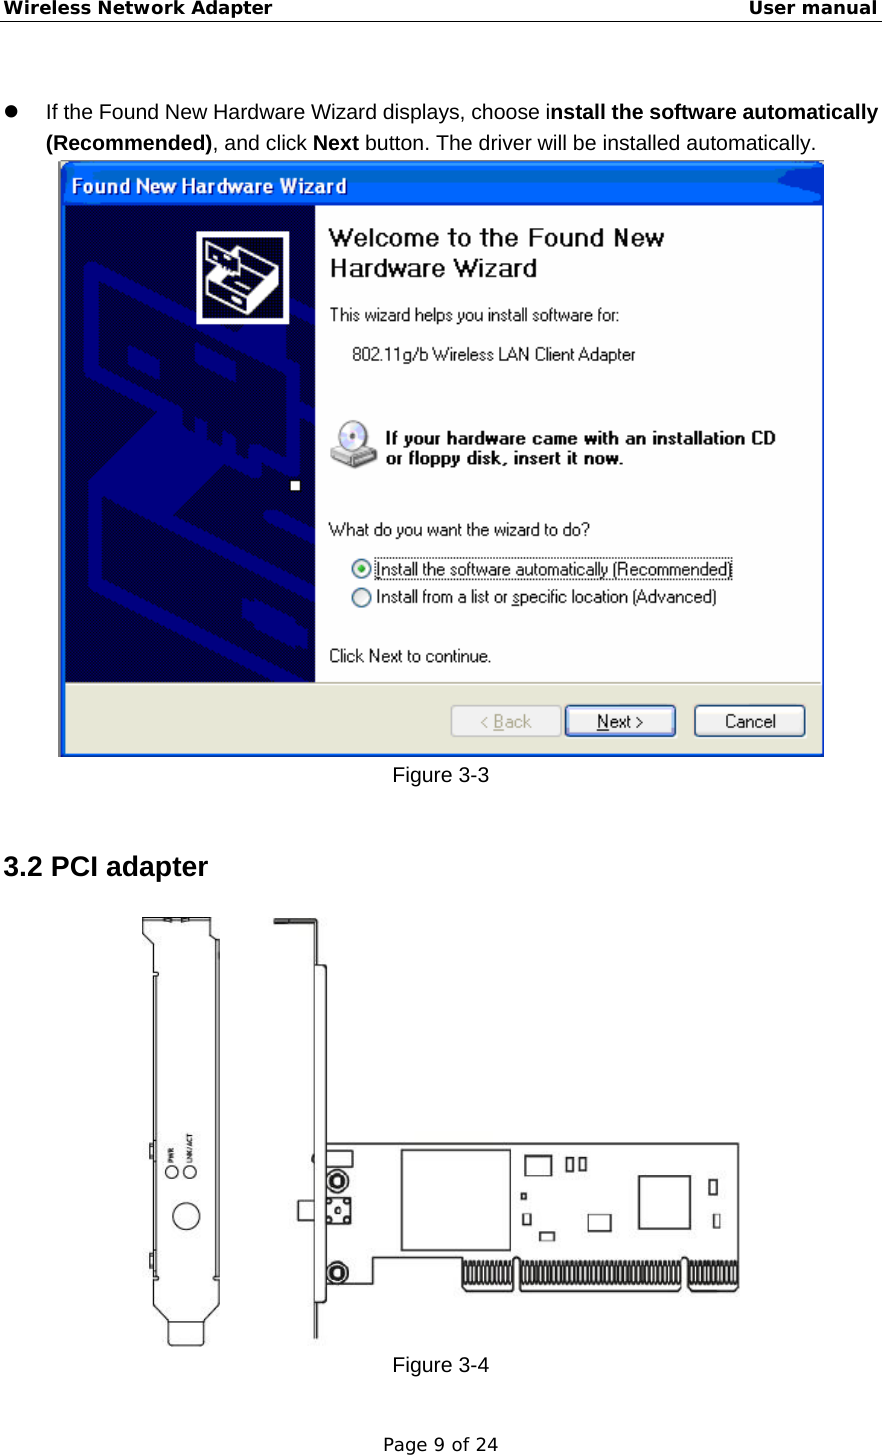 Wireless Network Adapter                                                    User manual Page 9 of 24  z  If the Found New Hardware Wizard displays, choose install the software automatically (Recommended), and click Next button. The driver will be installed automatically.  Figure 3-3  3.2 PCI adapter  Figure 3-4 